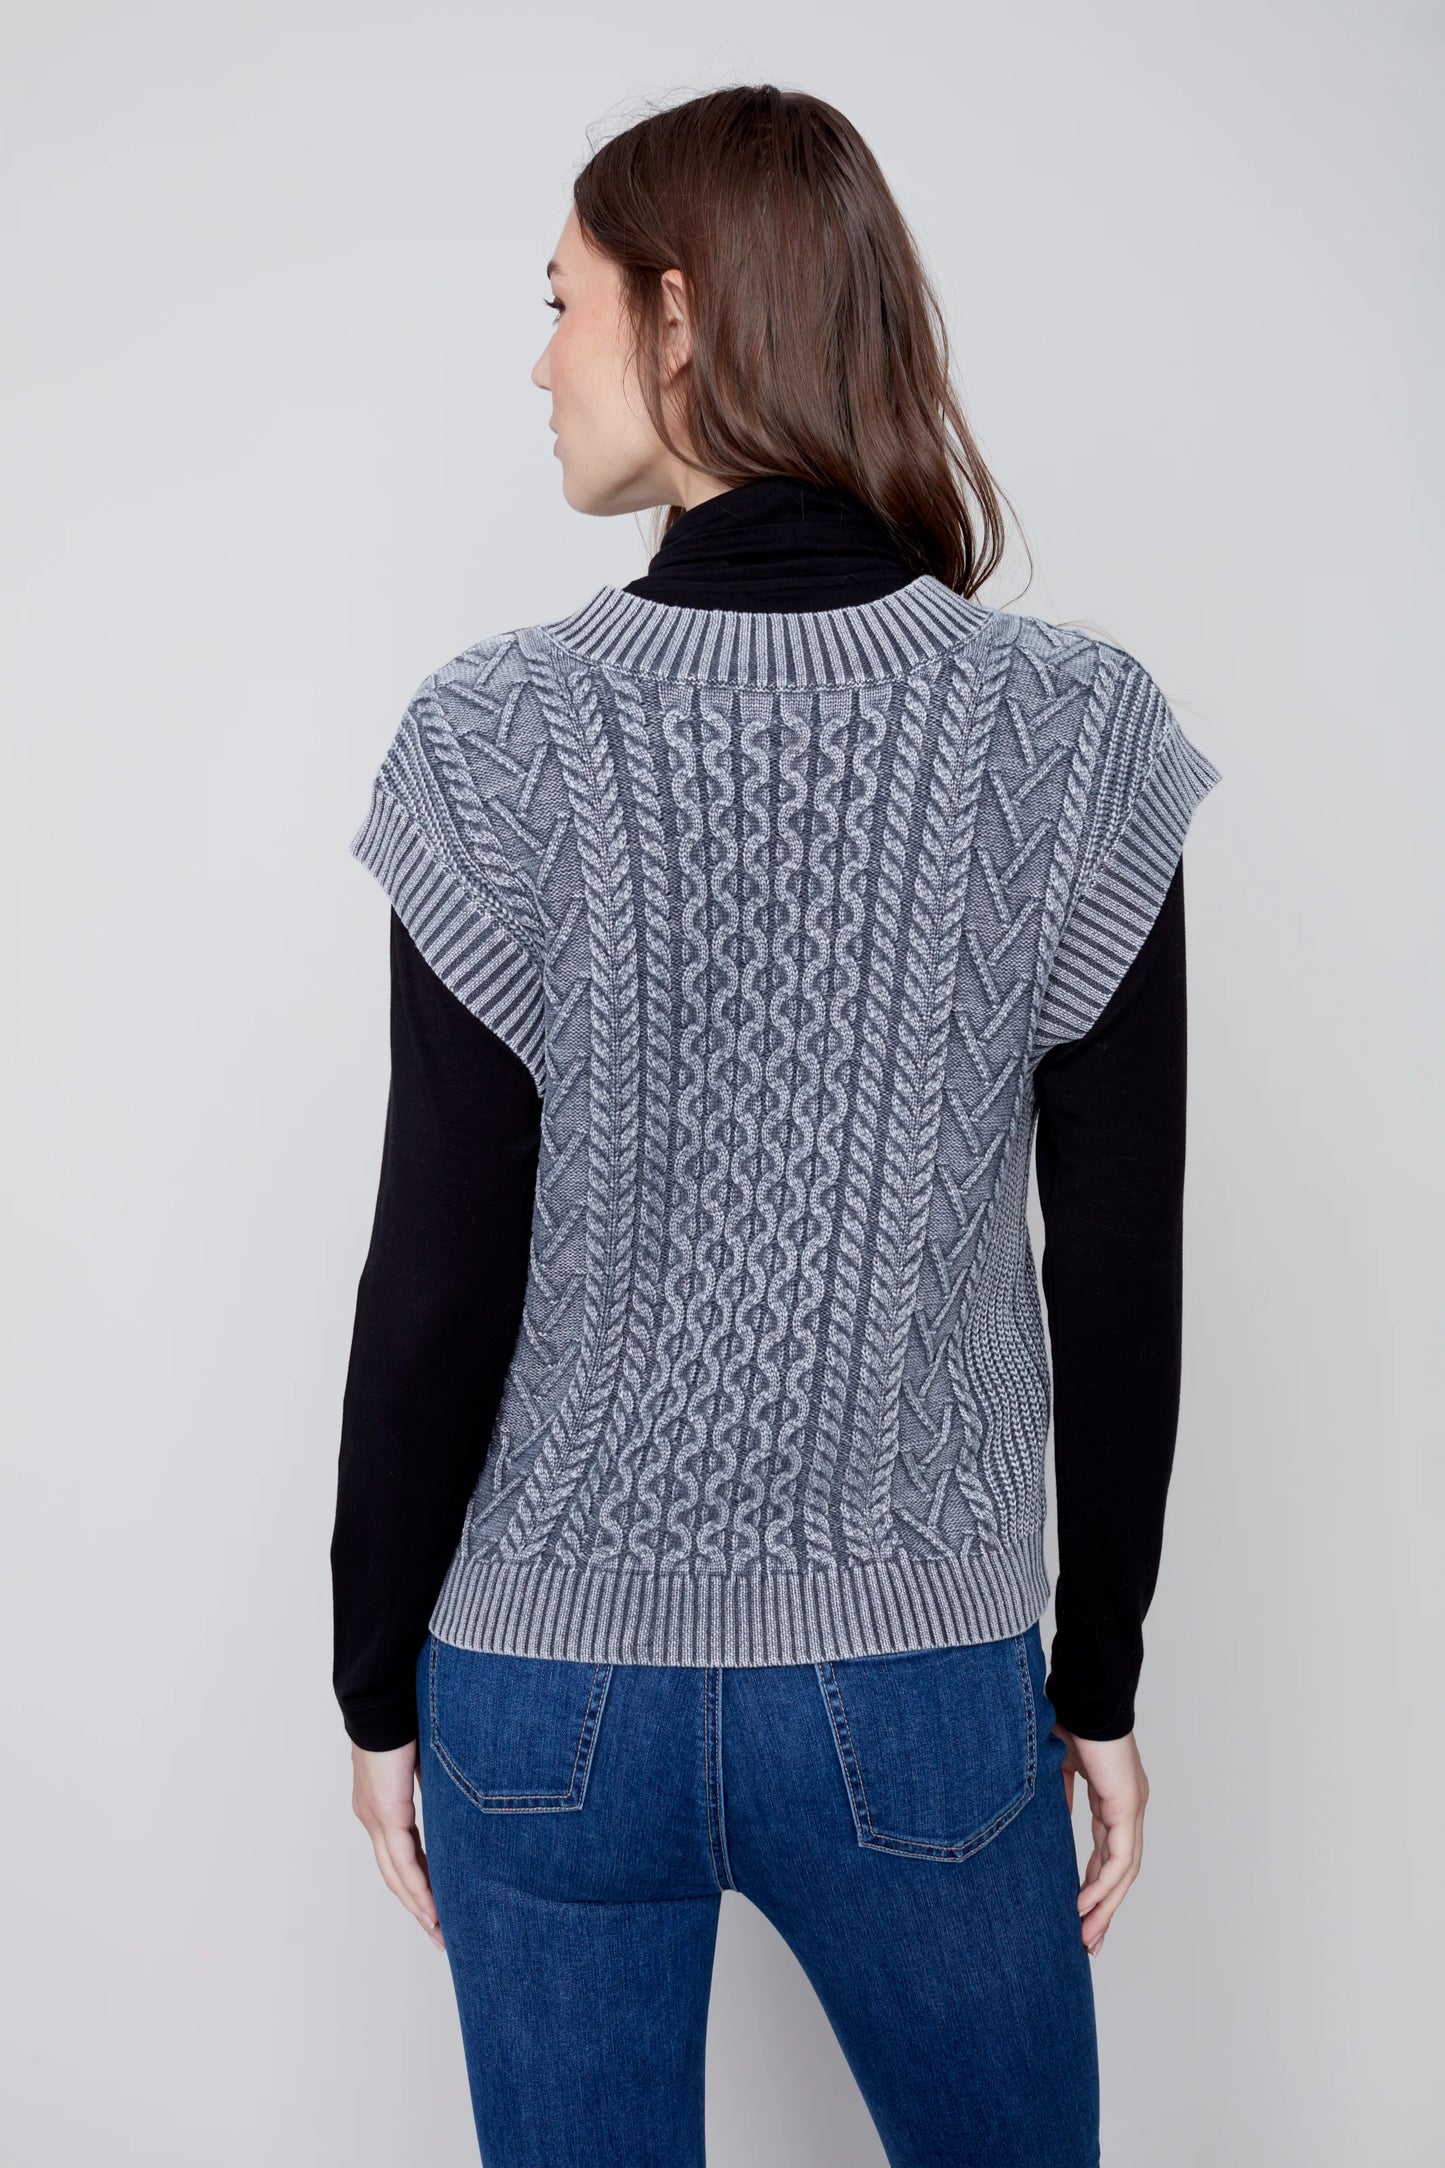 Charlie B Charlie B - V-Neck Cold-Dye Cable Knit Sleeveless Vest - Charcoal available at The Good Life Boutique